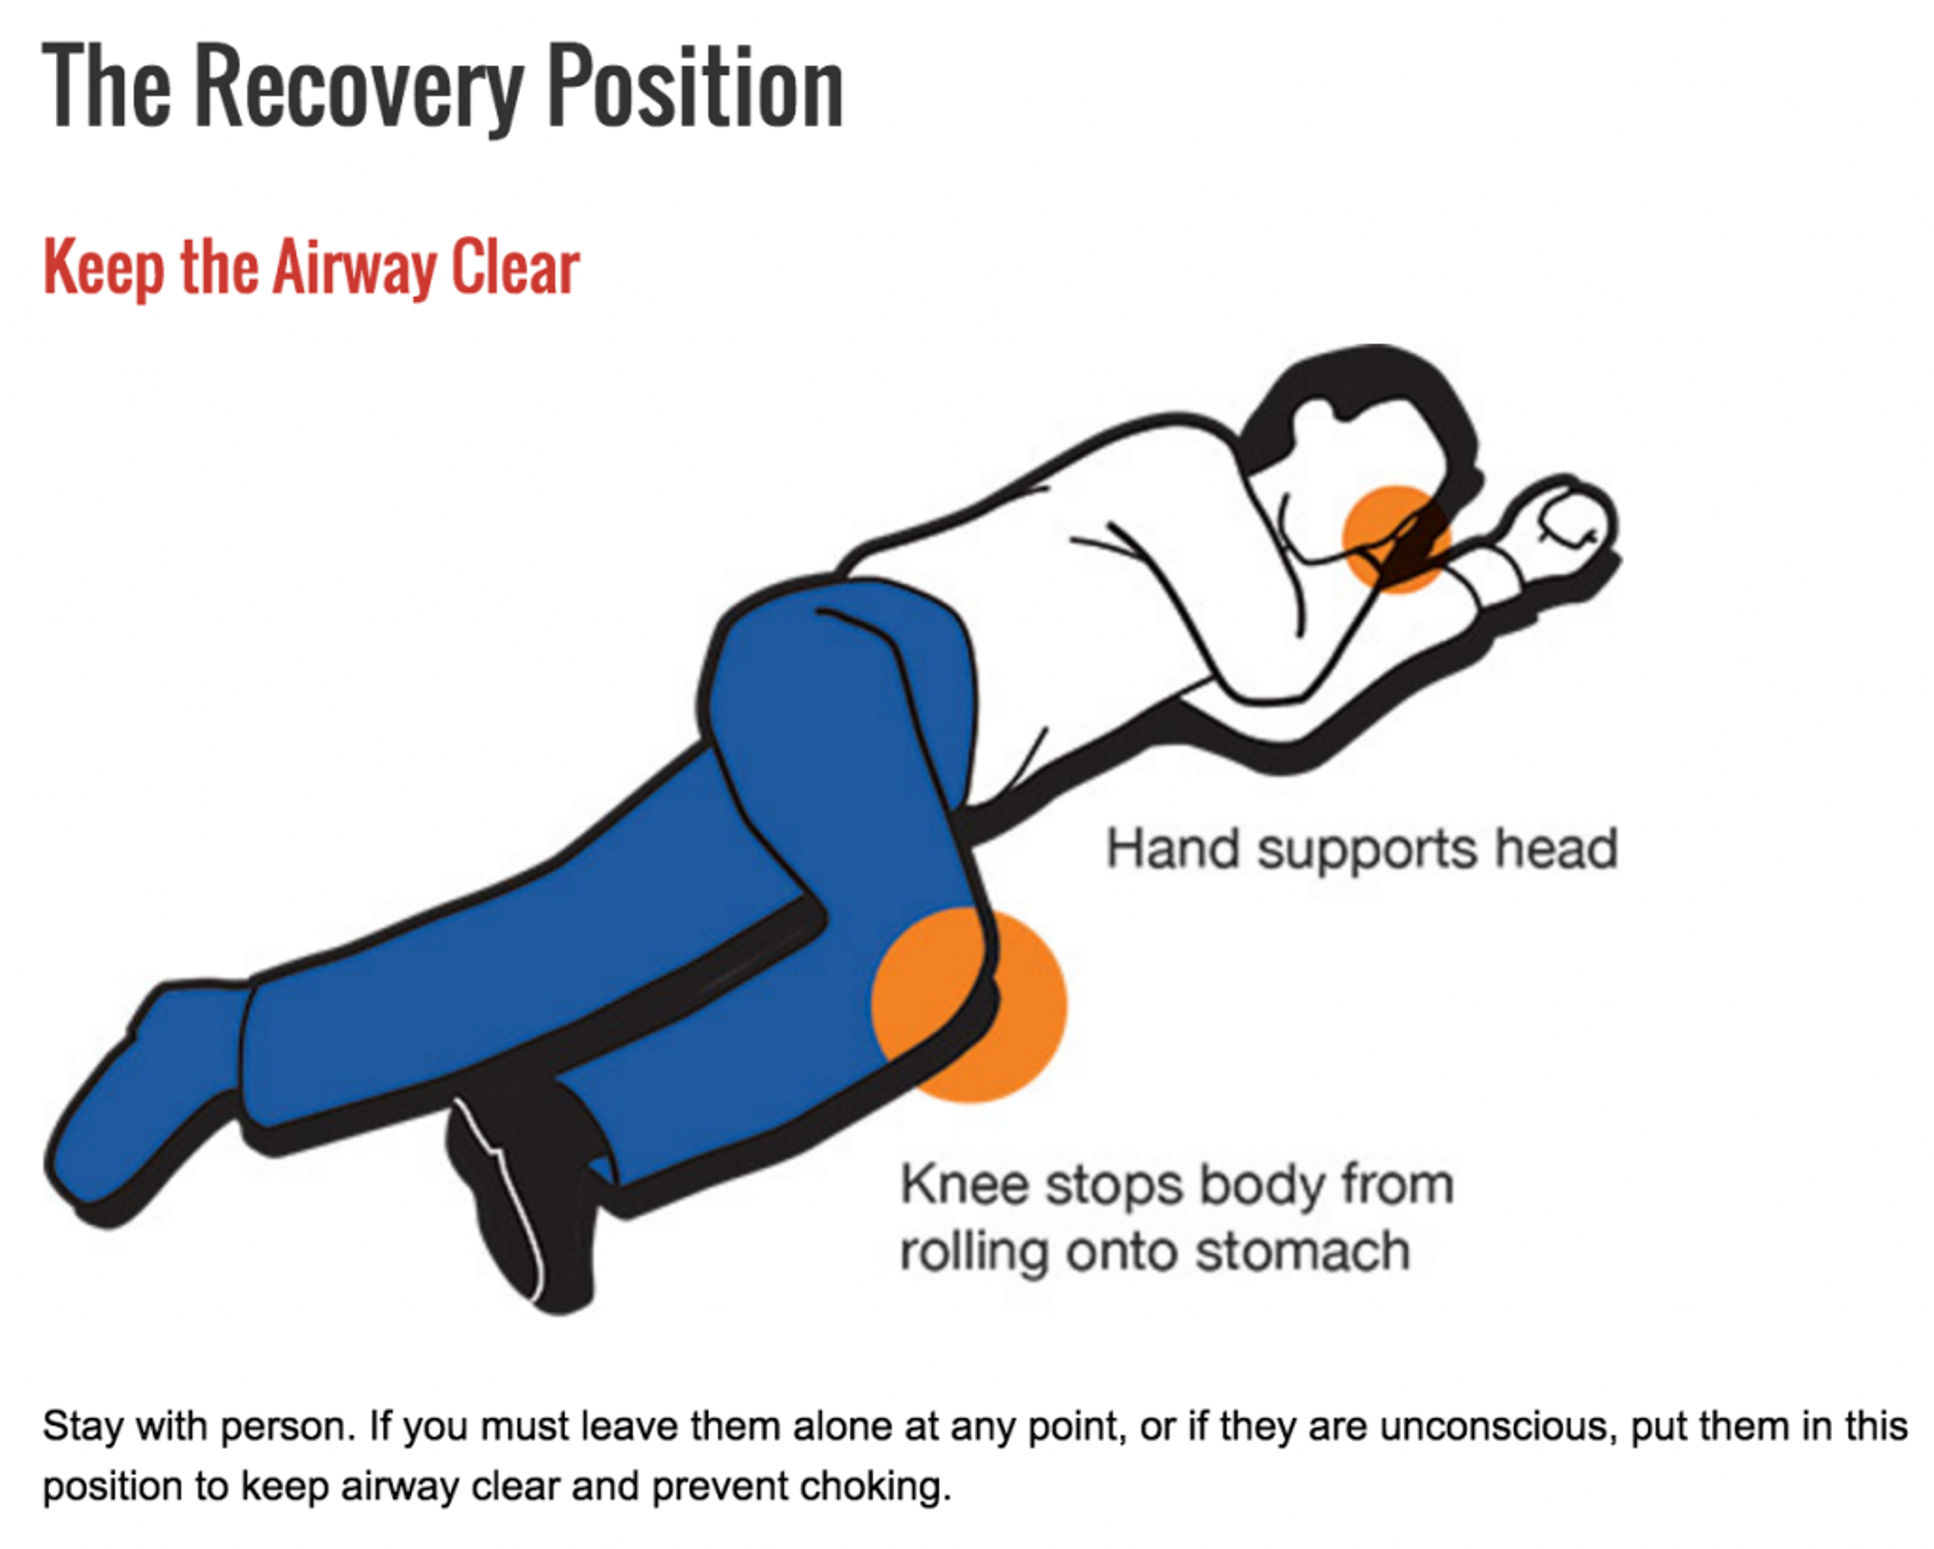 RecoveryPositionFirstAid